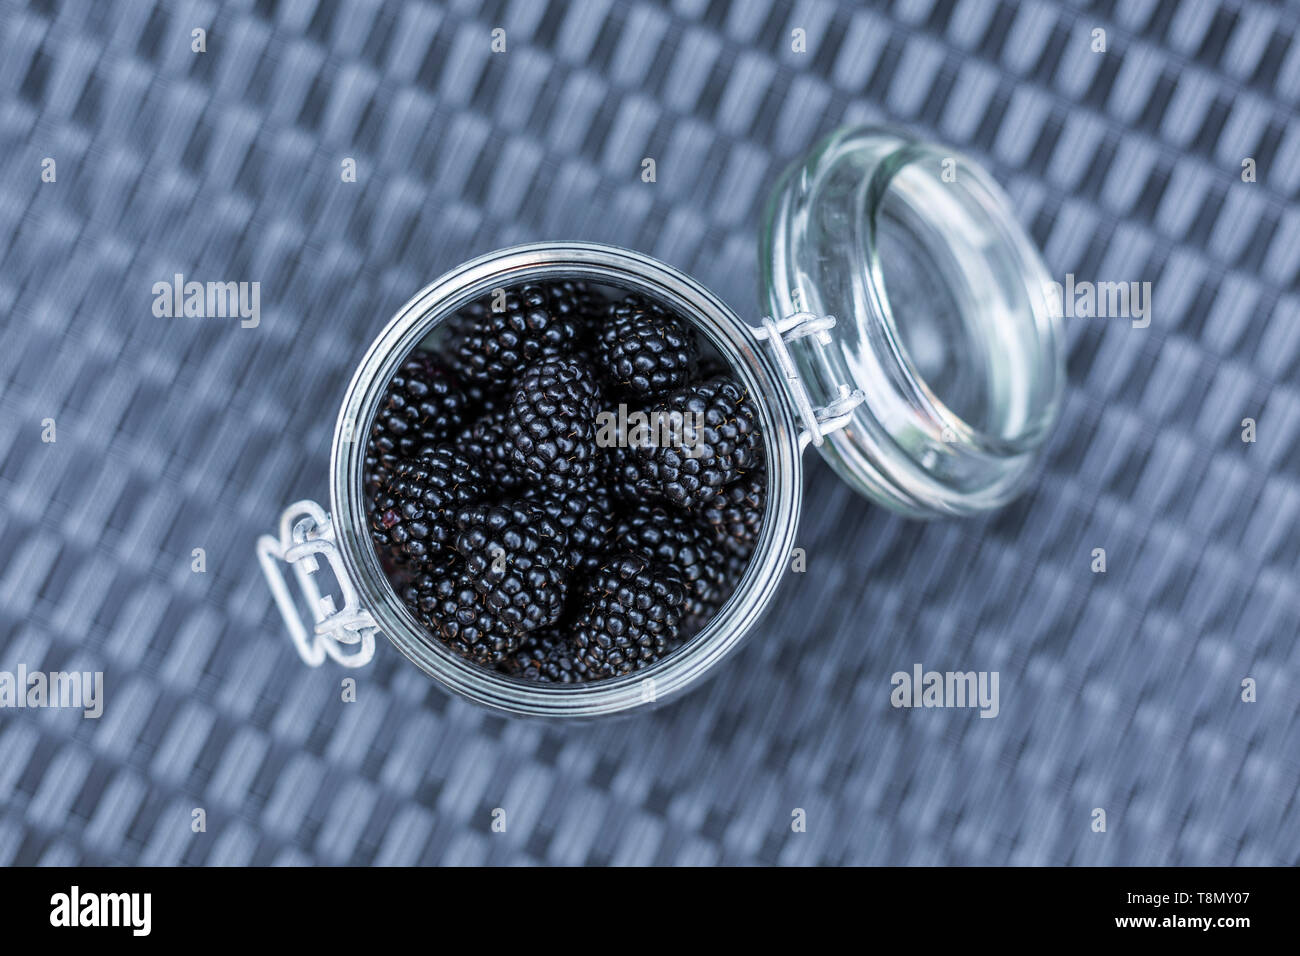 Fresh blackberries in a glass jar on a grey rattan surface viewed from above Stock Photo